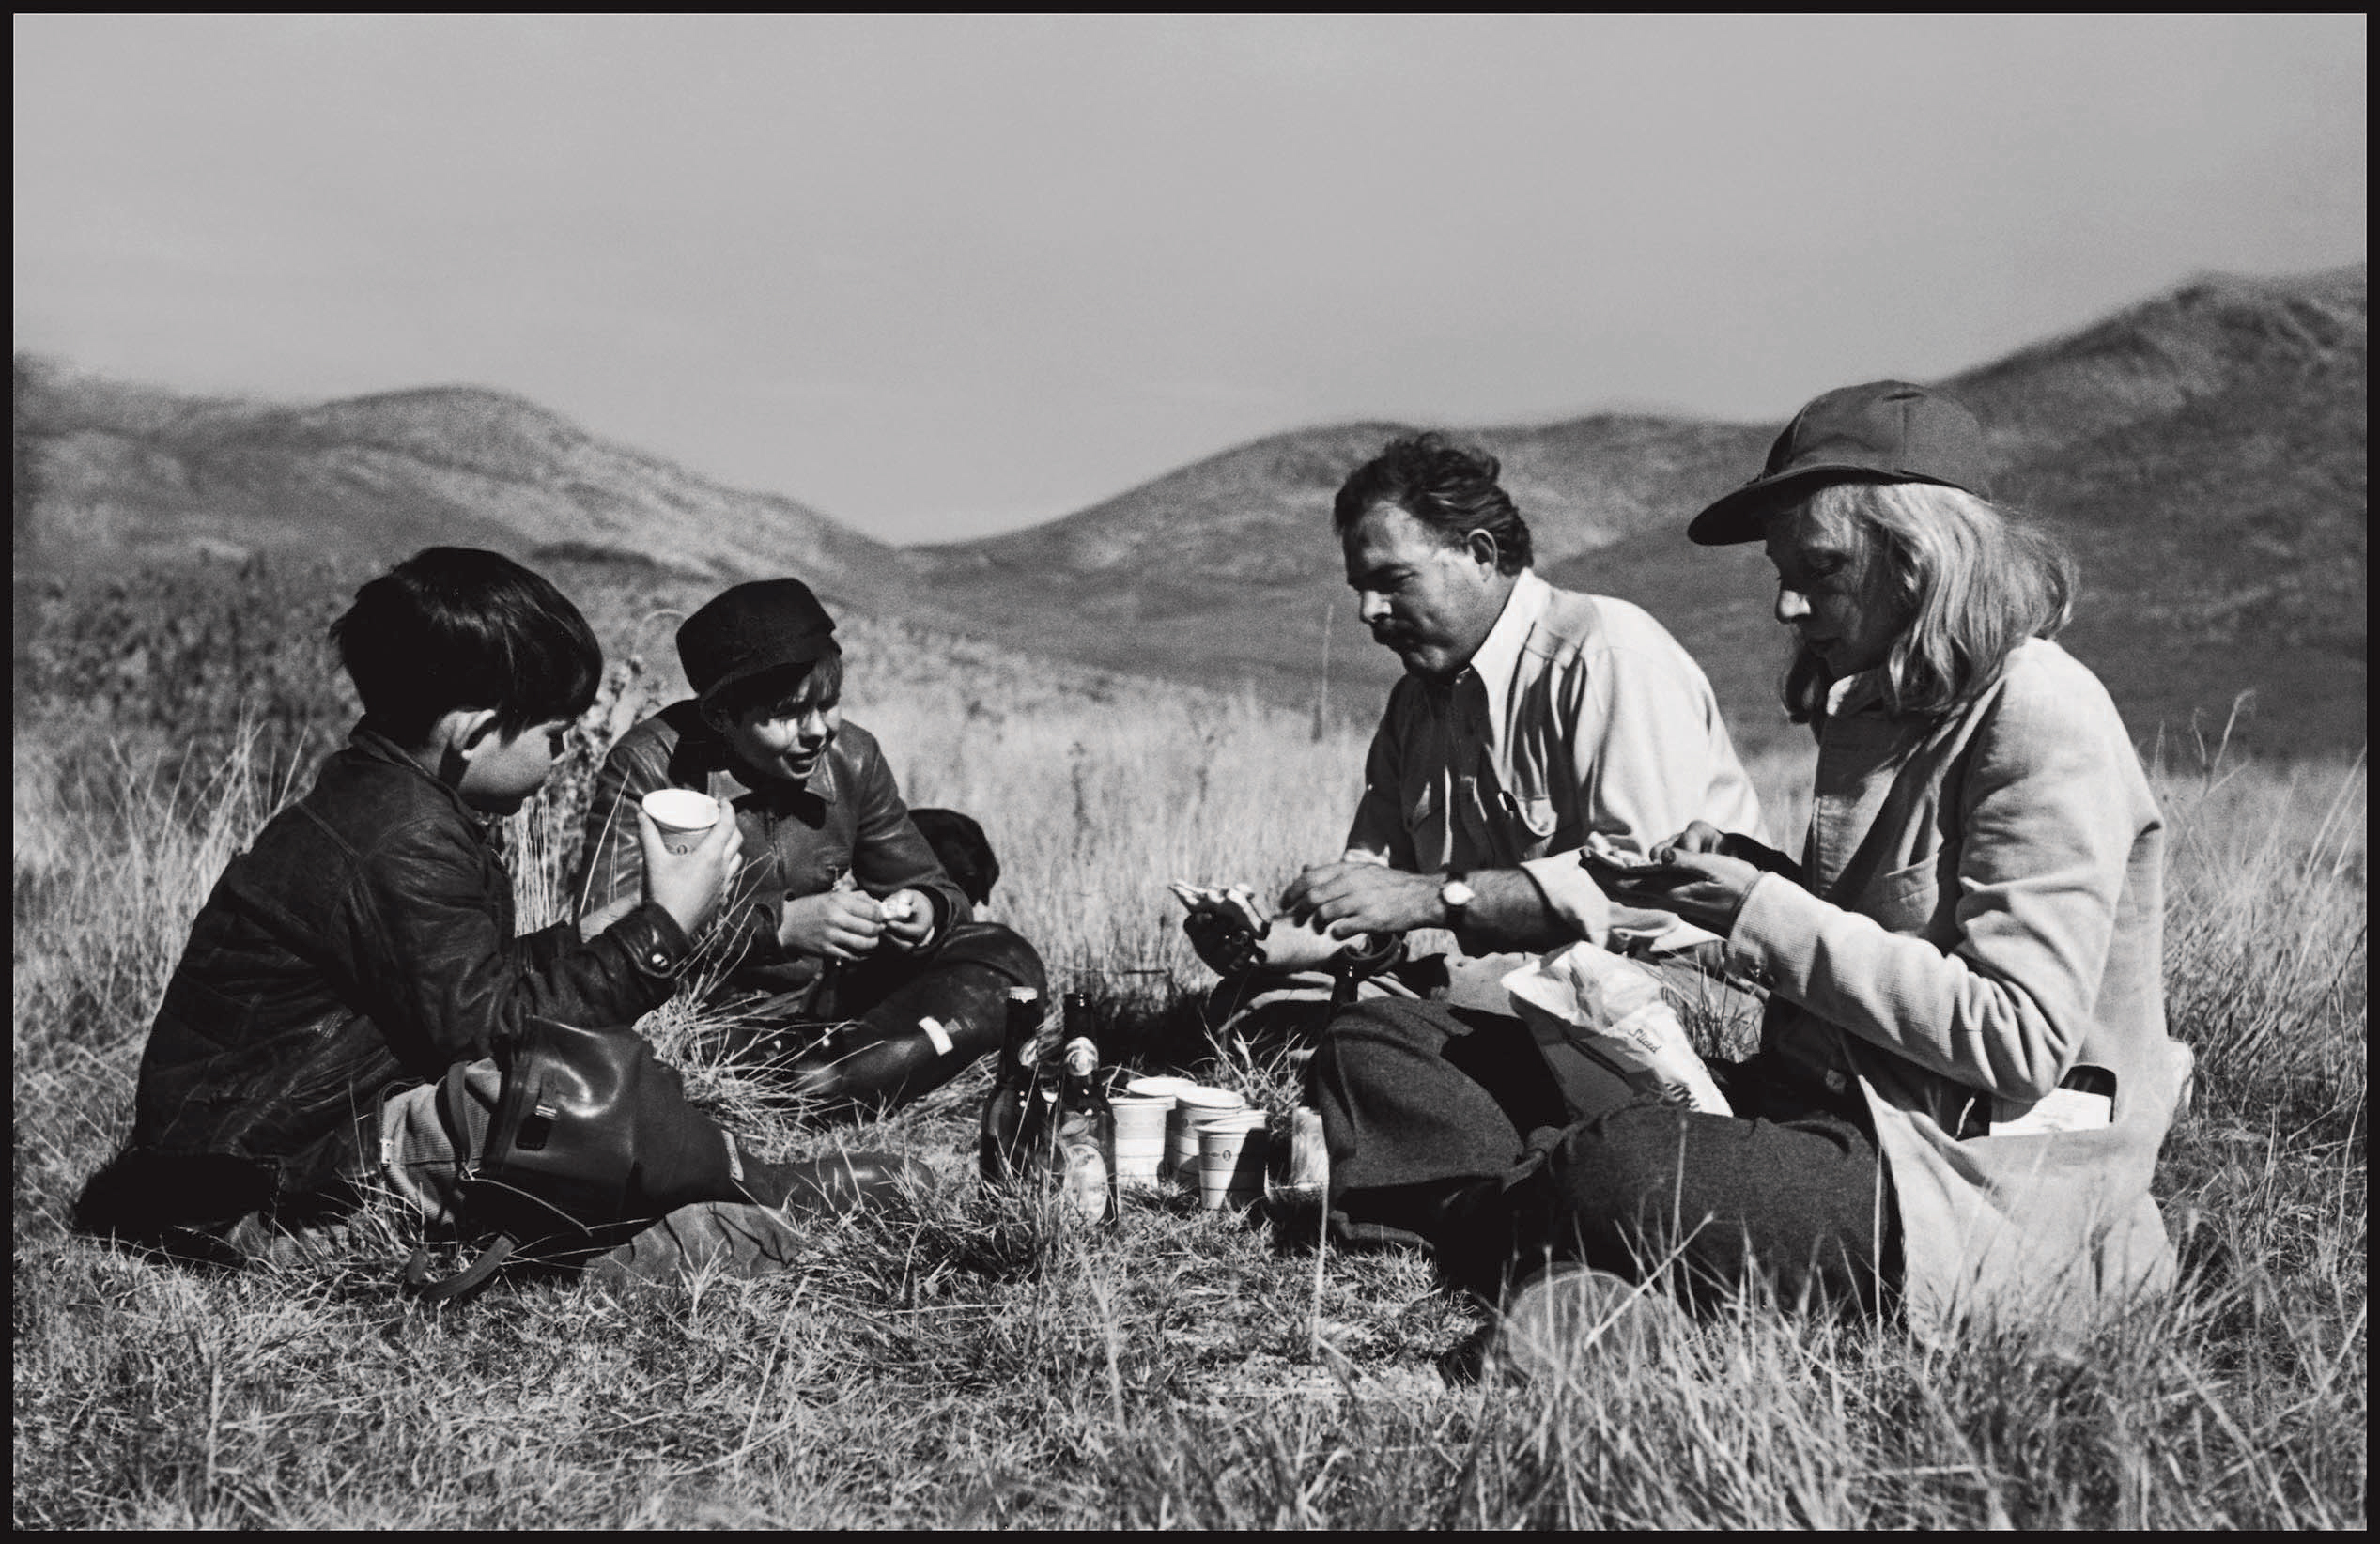 Hemingway picnicked with his third wife, Martha Gellhorn, and sons in the hills of Sun Valley, which reminded him of the Spanish countryside. Photography: © Robert Capa/International Center of Photography/Magnum Photos